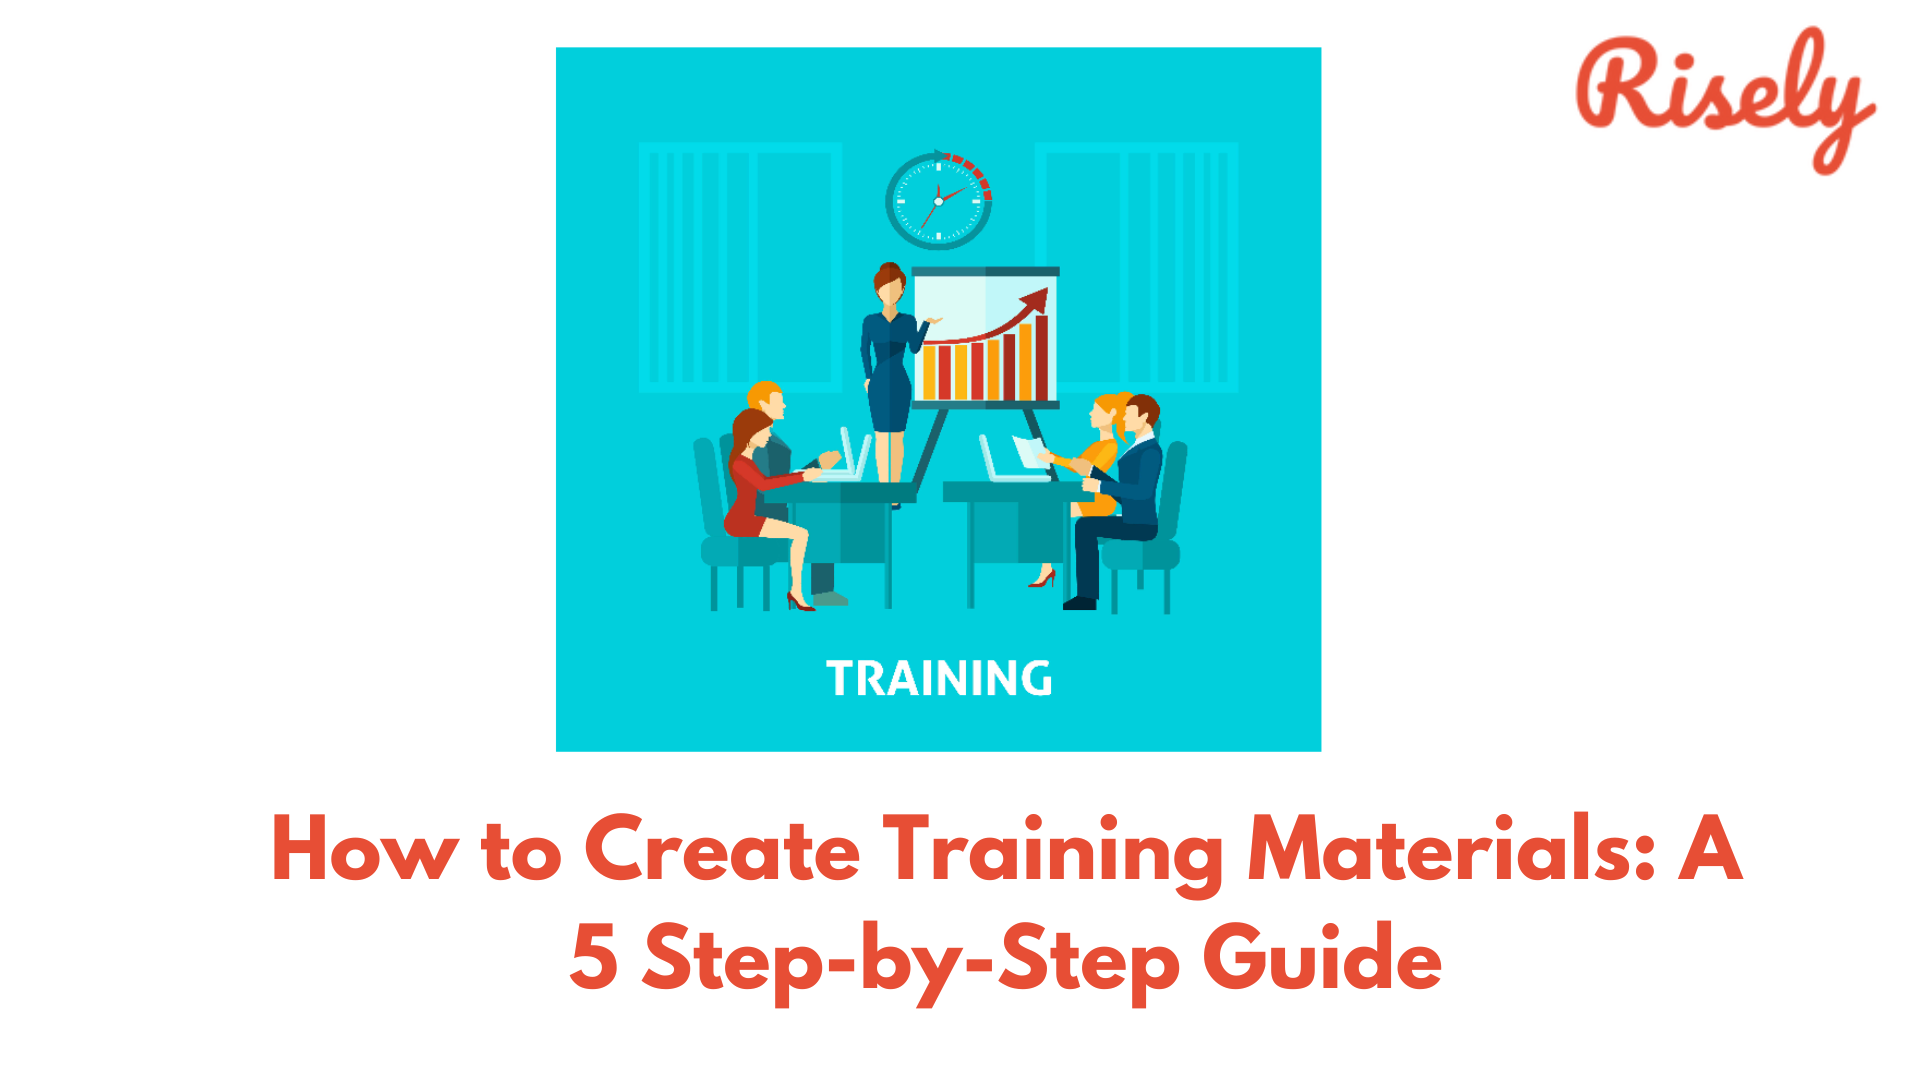 How to Create Training Materials: A 5 Step-by-Step Guide